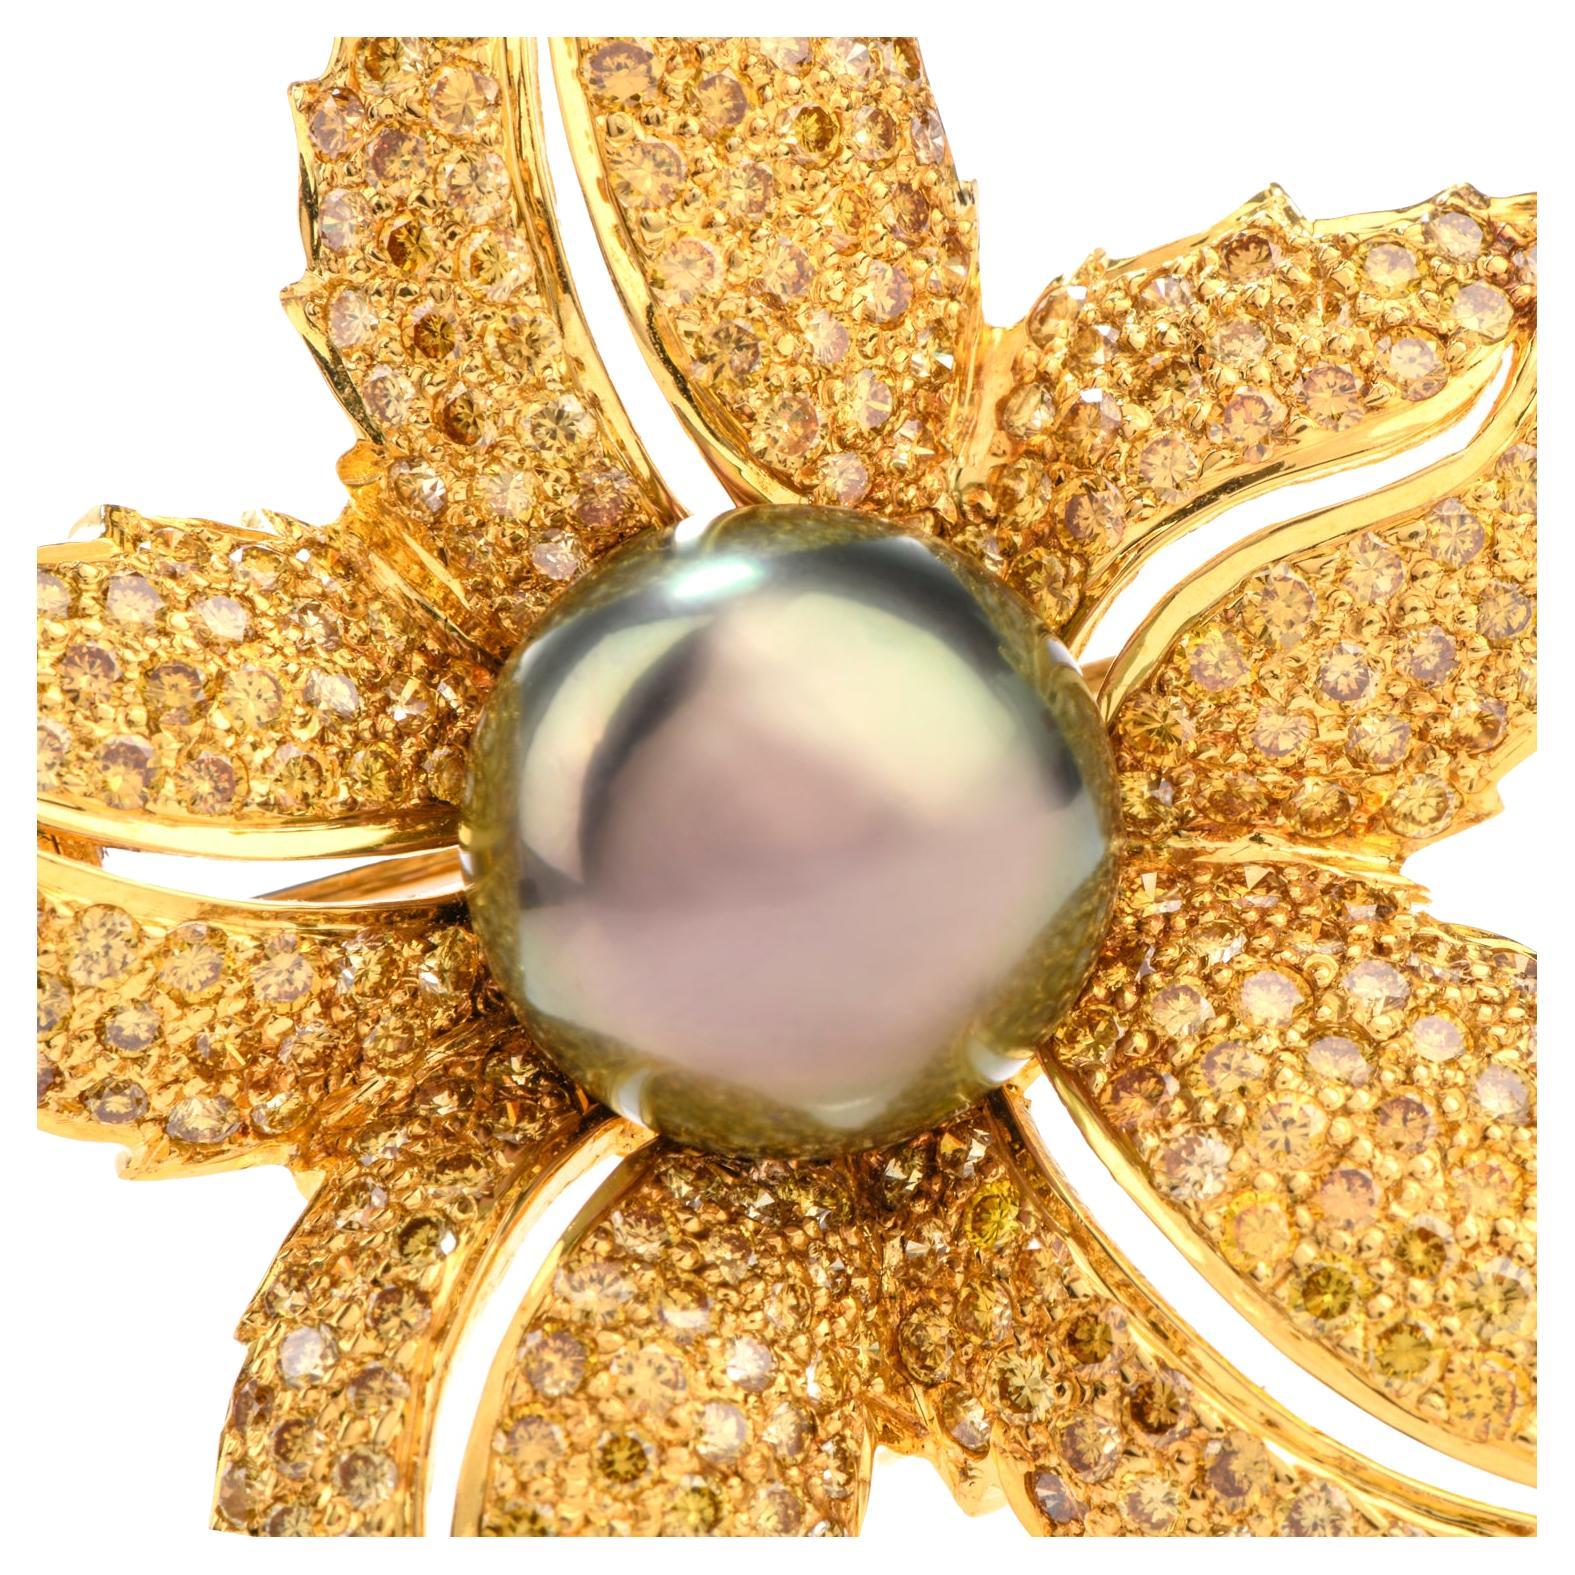 This incredibly bright and glistening brooch was inspired by a

tropical floral motif and crafted in 18K yellow gold.

Measuring appx. 1.5 x 2.0 inch, the brooch is certain

to make a statement.  Featuring one 12mm Tahitian pearl in the center,